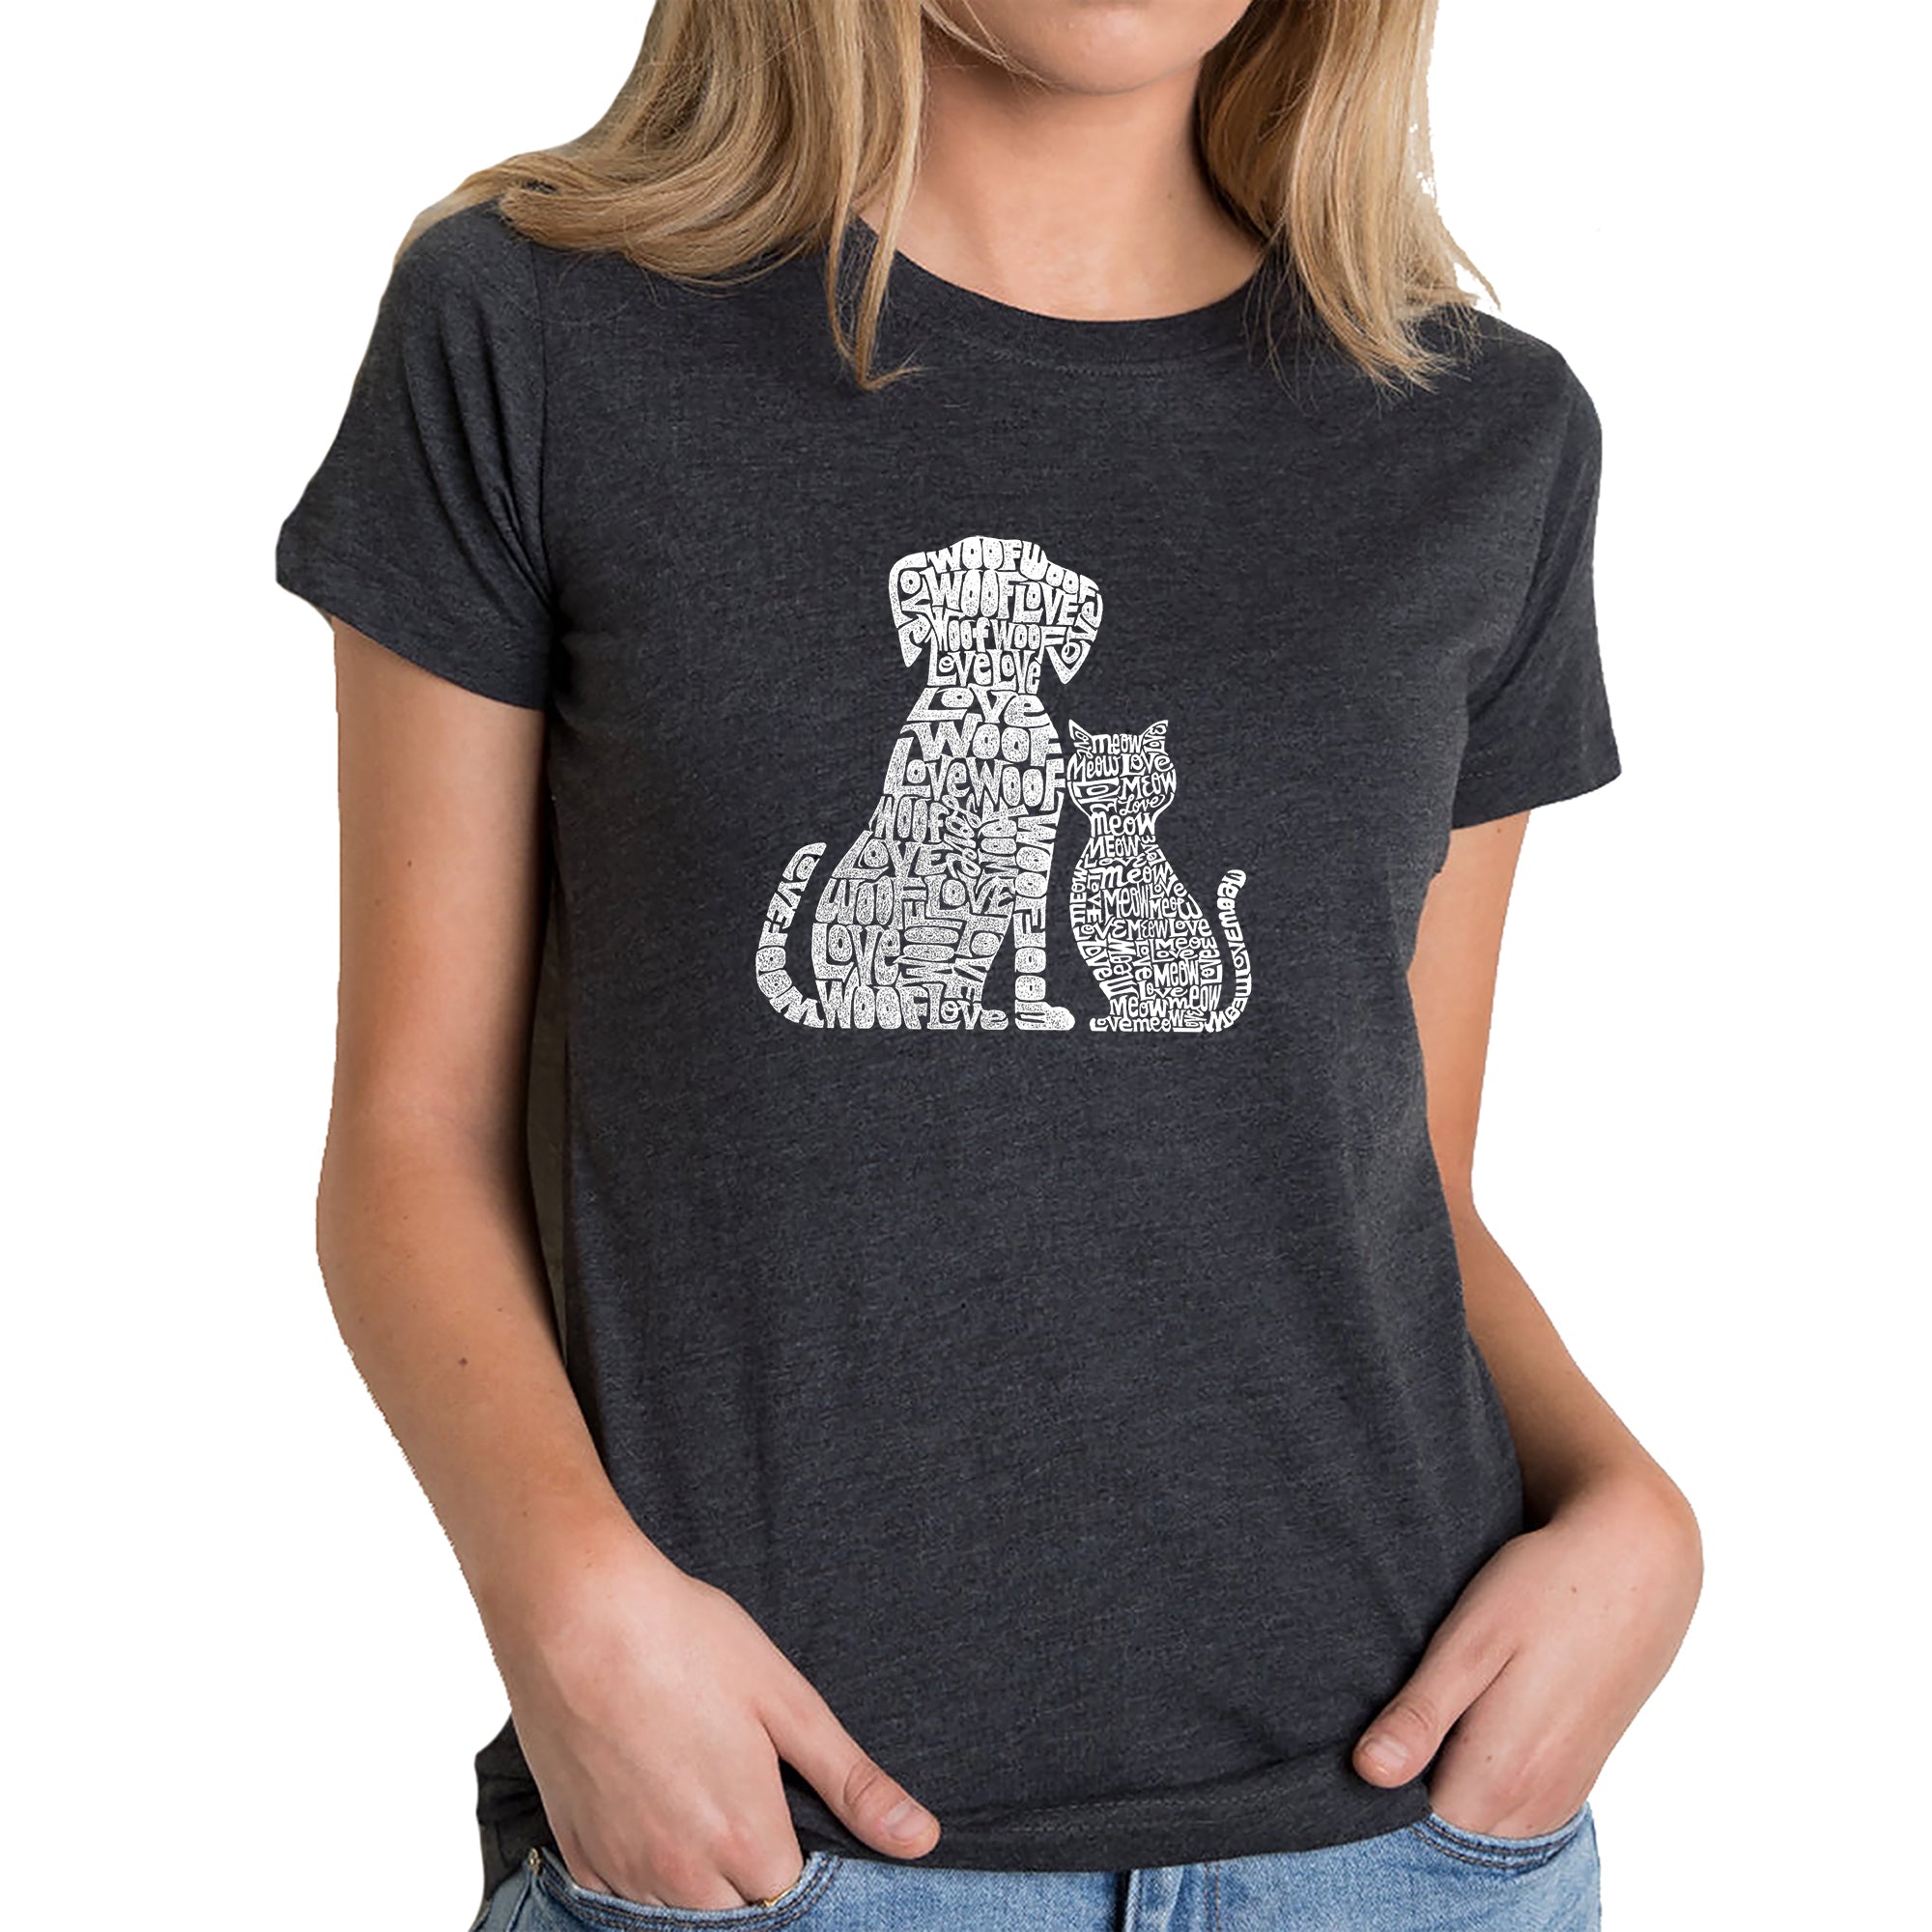 Dogs And Cats - Women's Premium Blend Word Art T-Shirt - Black - Large